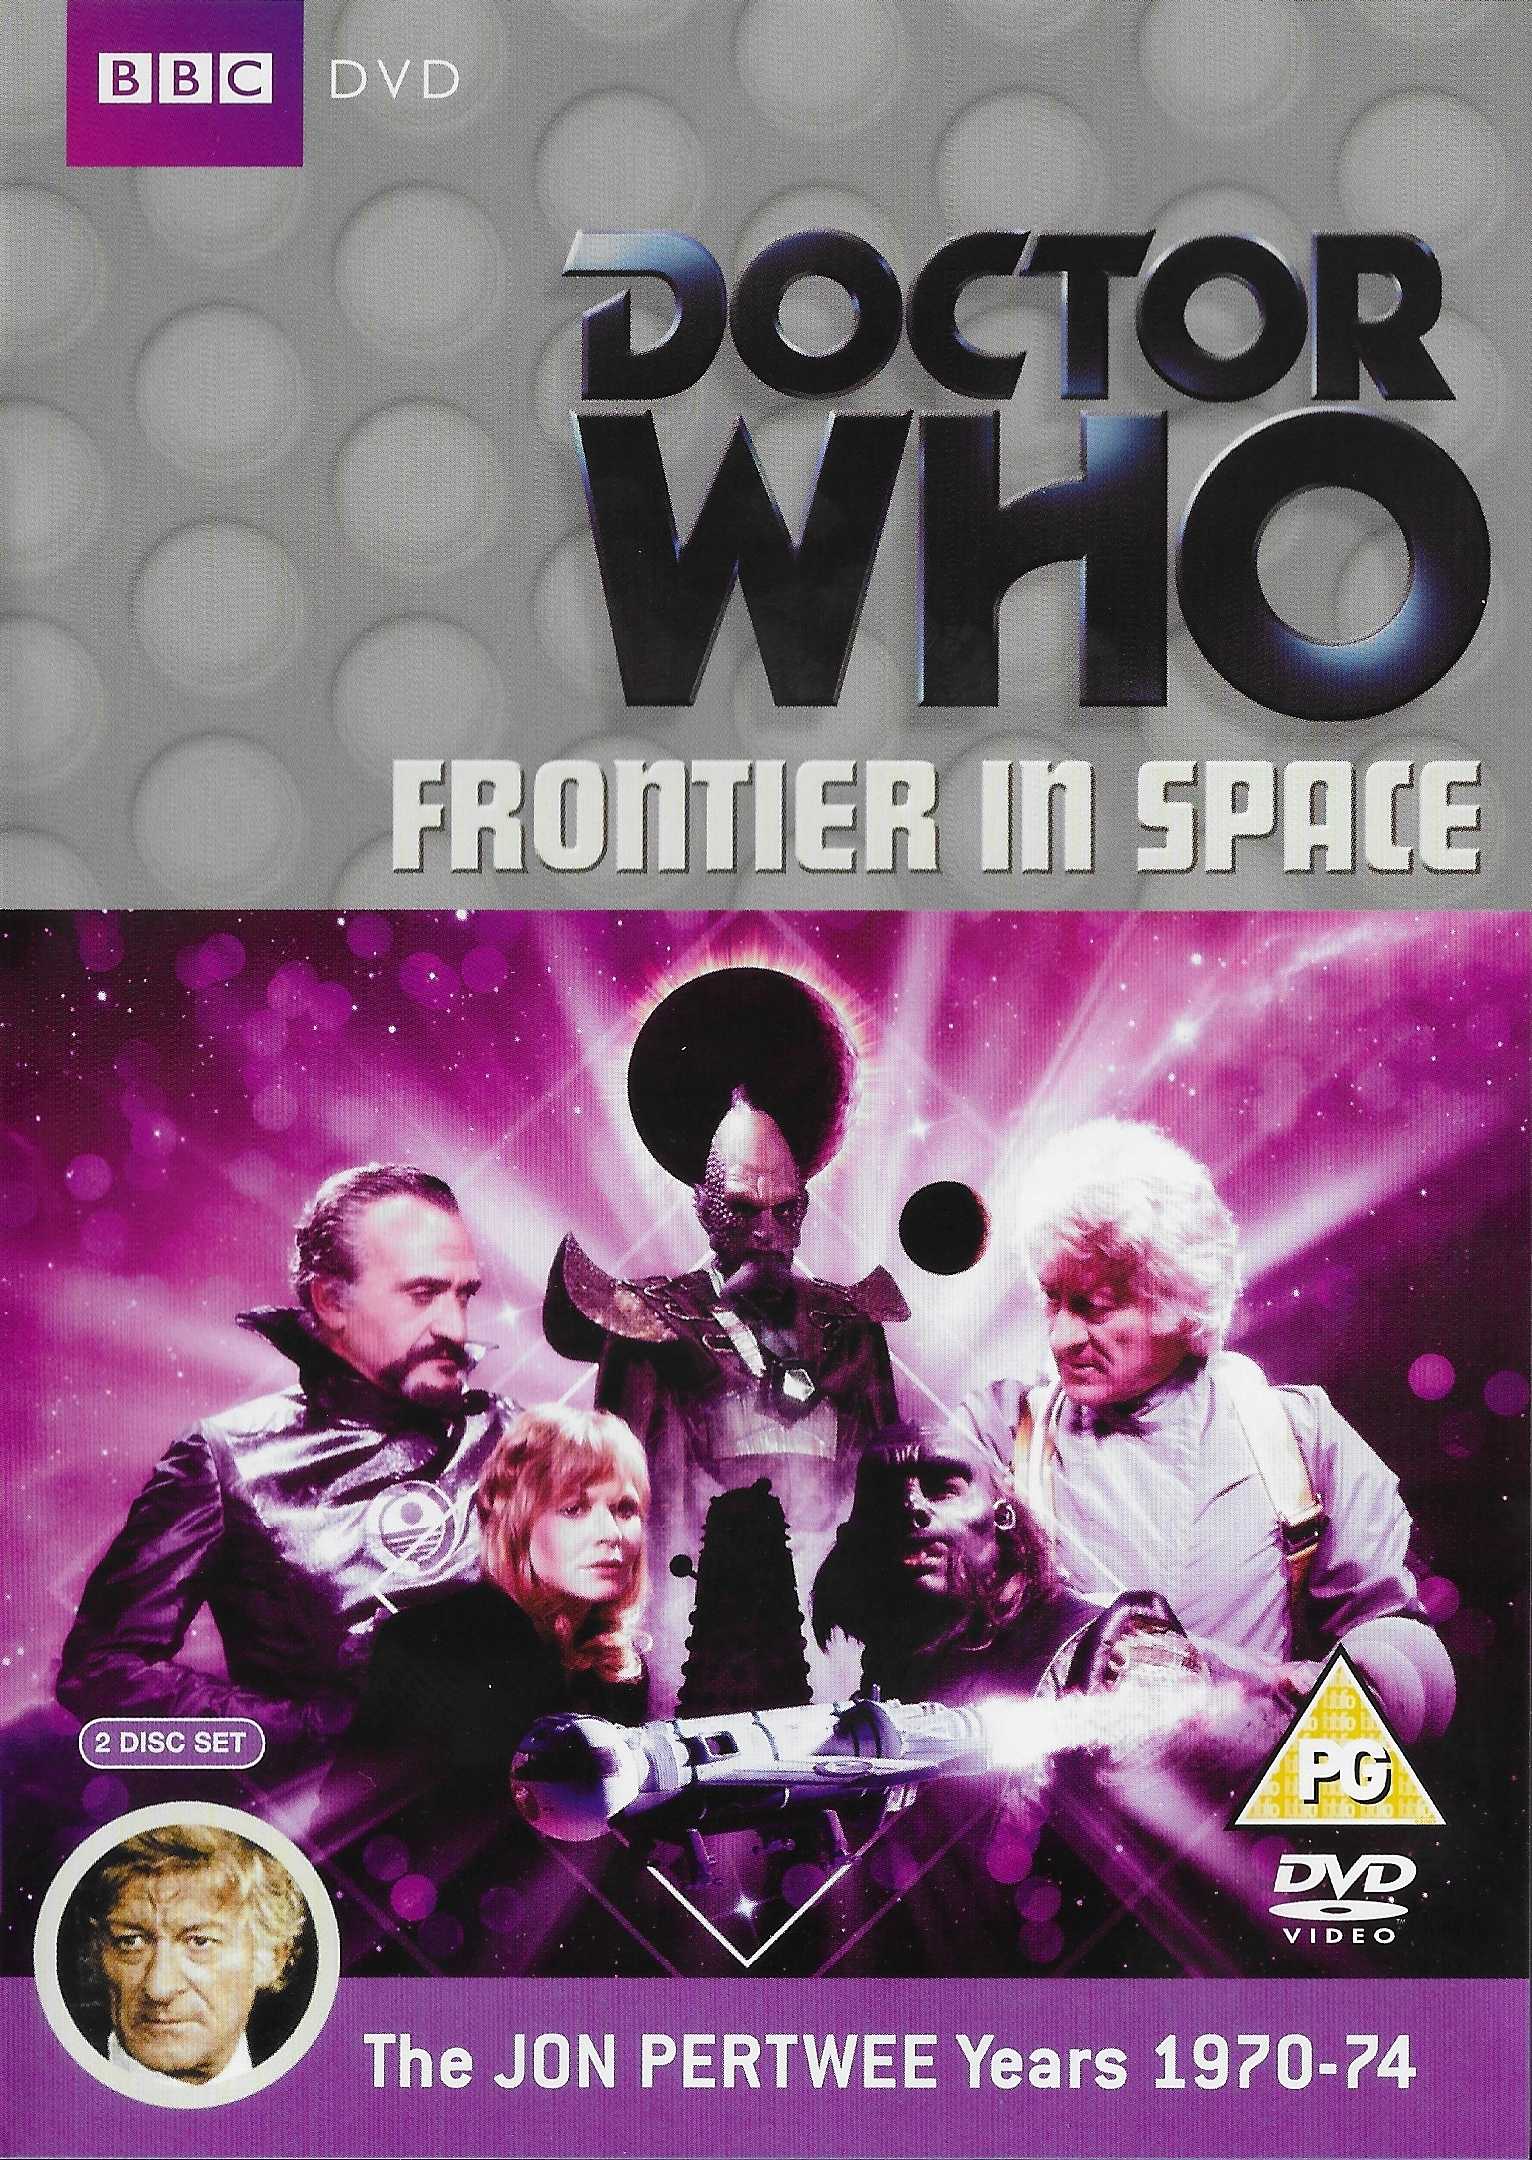 Picture of BBCDVD 2614A Doctor Who - Frontier in space by artist Malcolm Hulke from the BBC dvds - Records and Tapes library